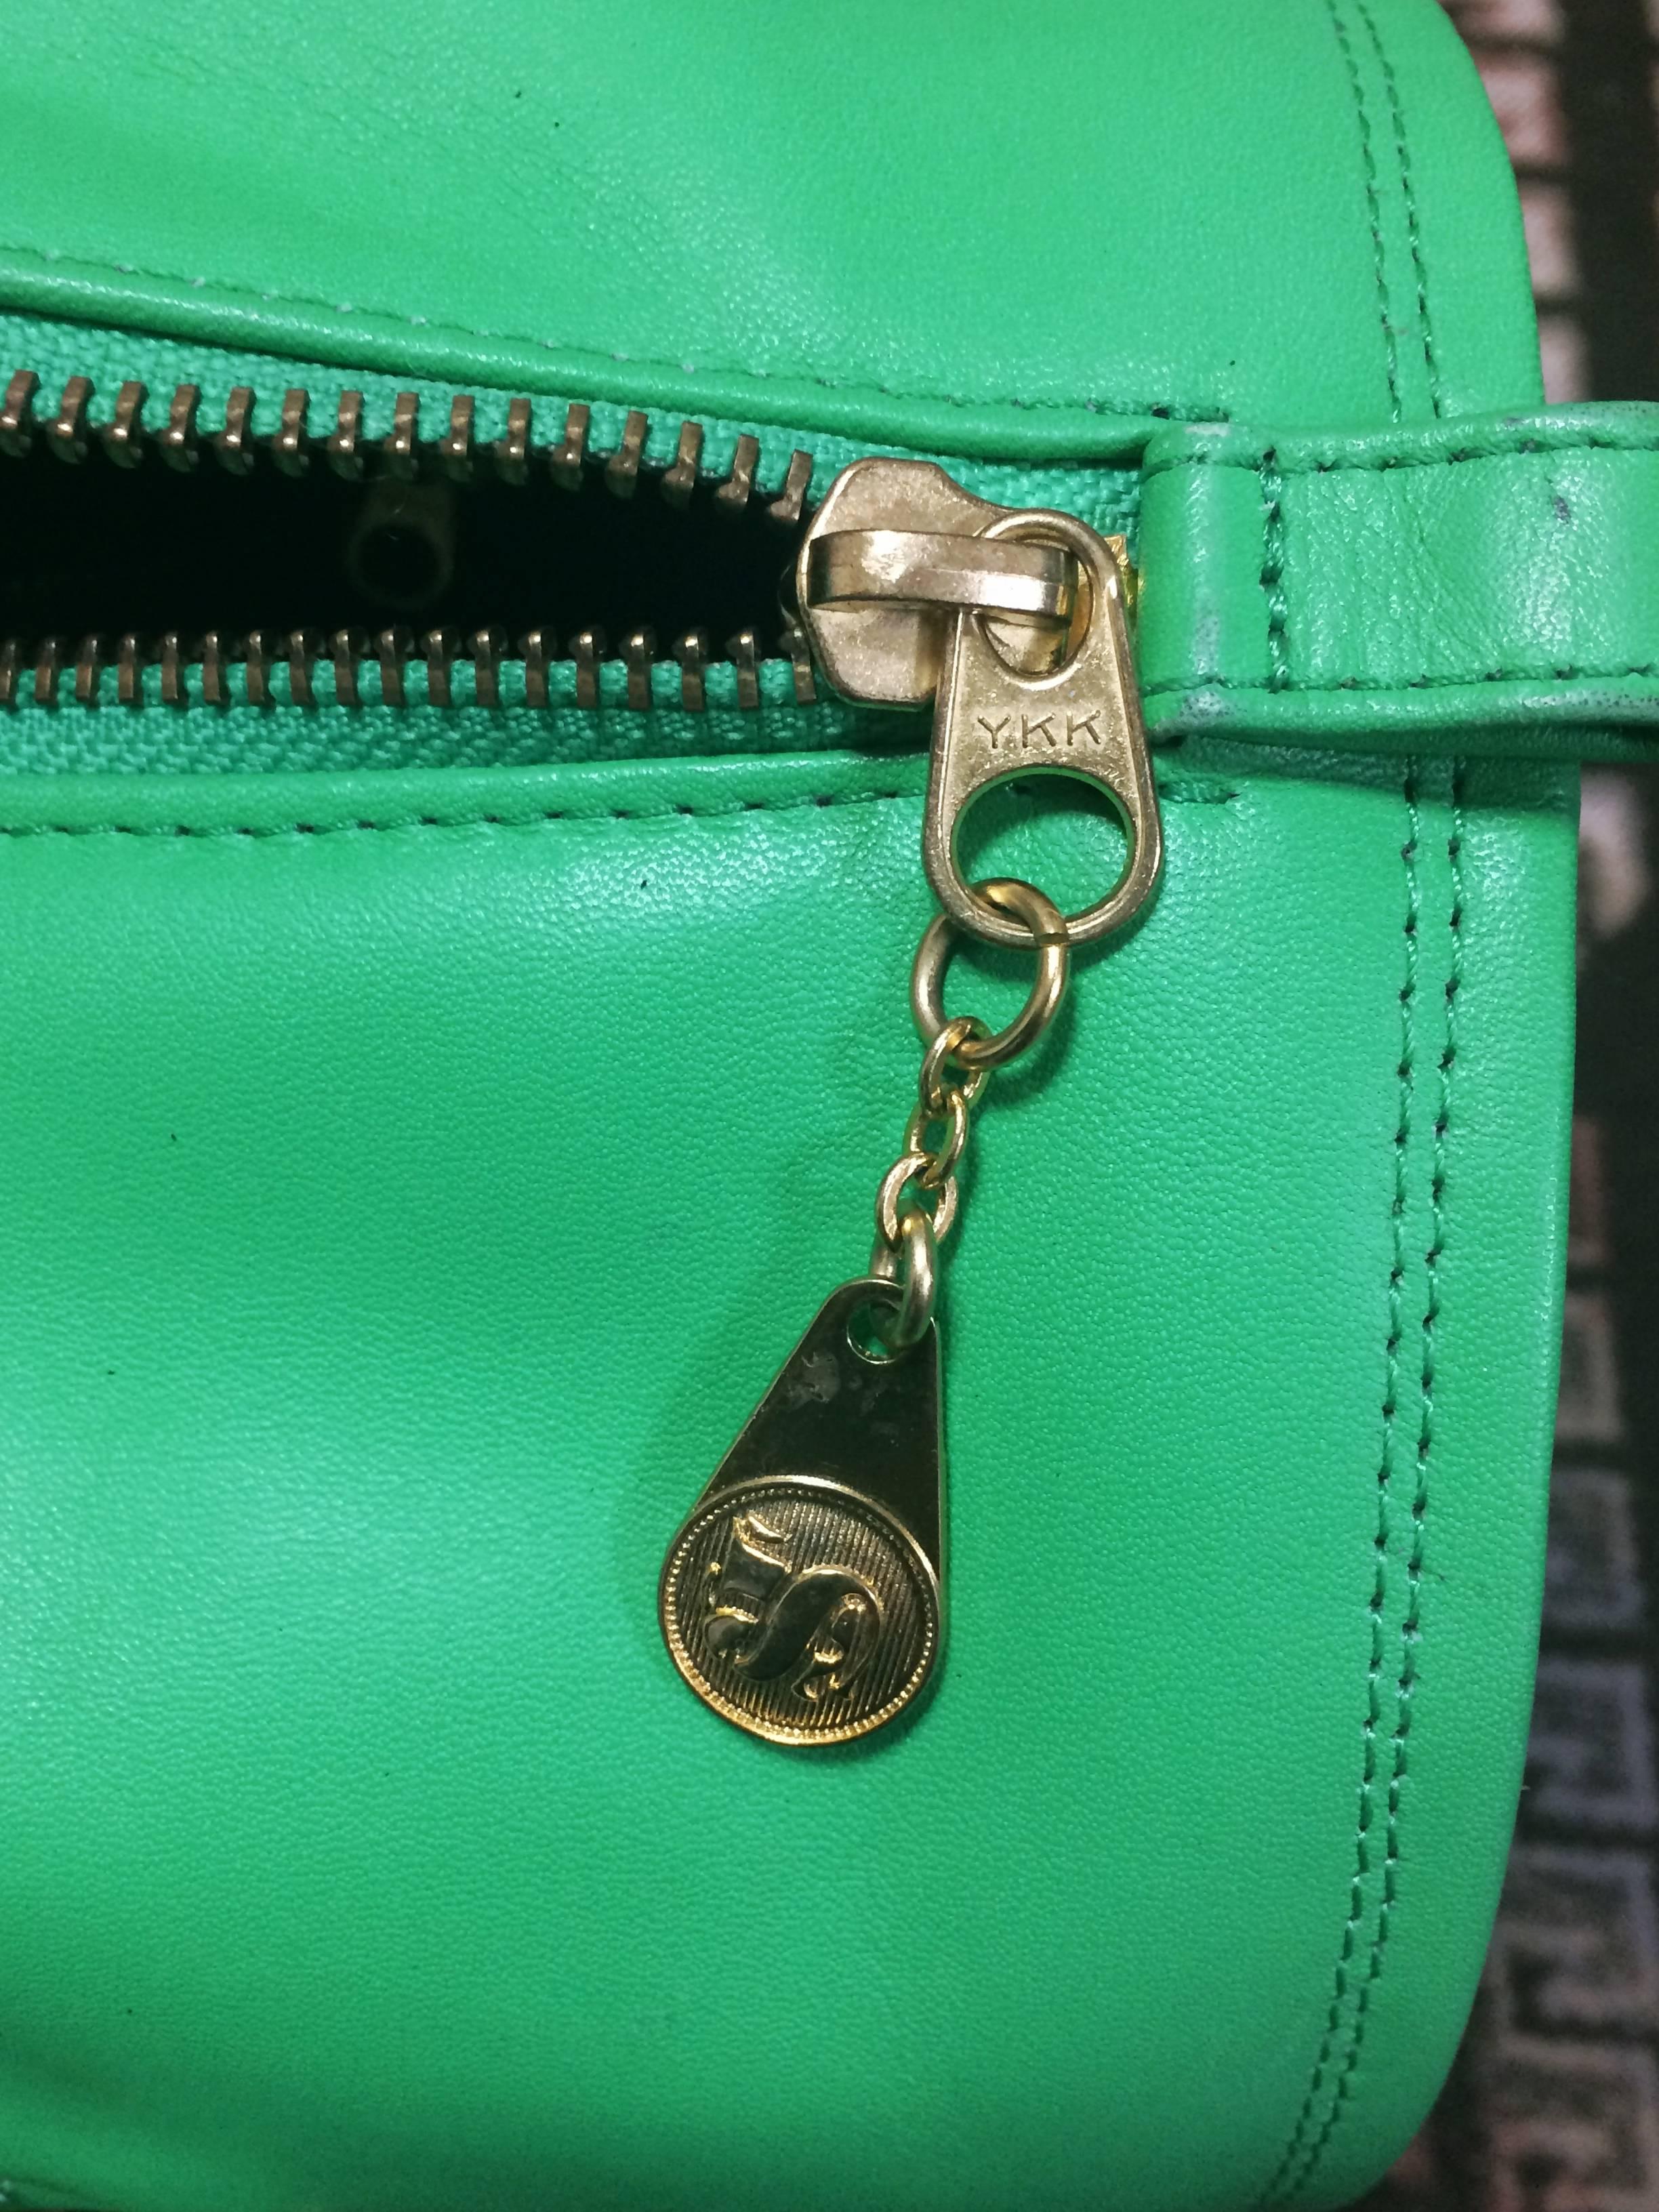 Women's or Men's Vintage SONIA RYKIEL green leather handbag purse in speedy bag style with chains